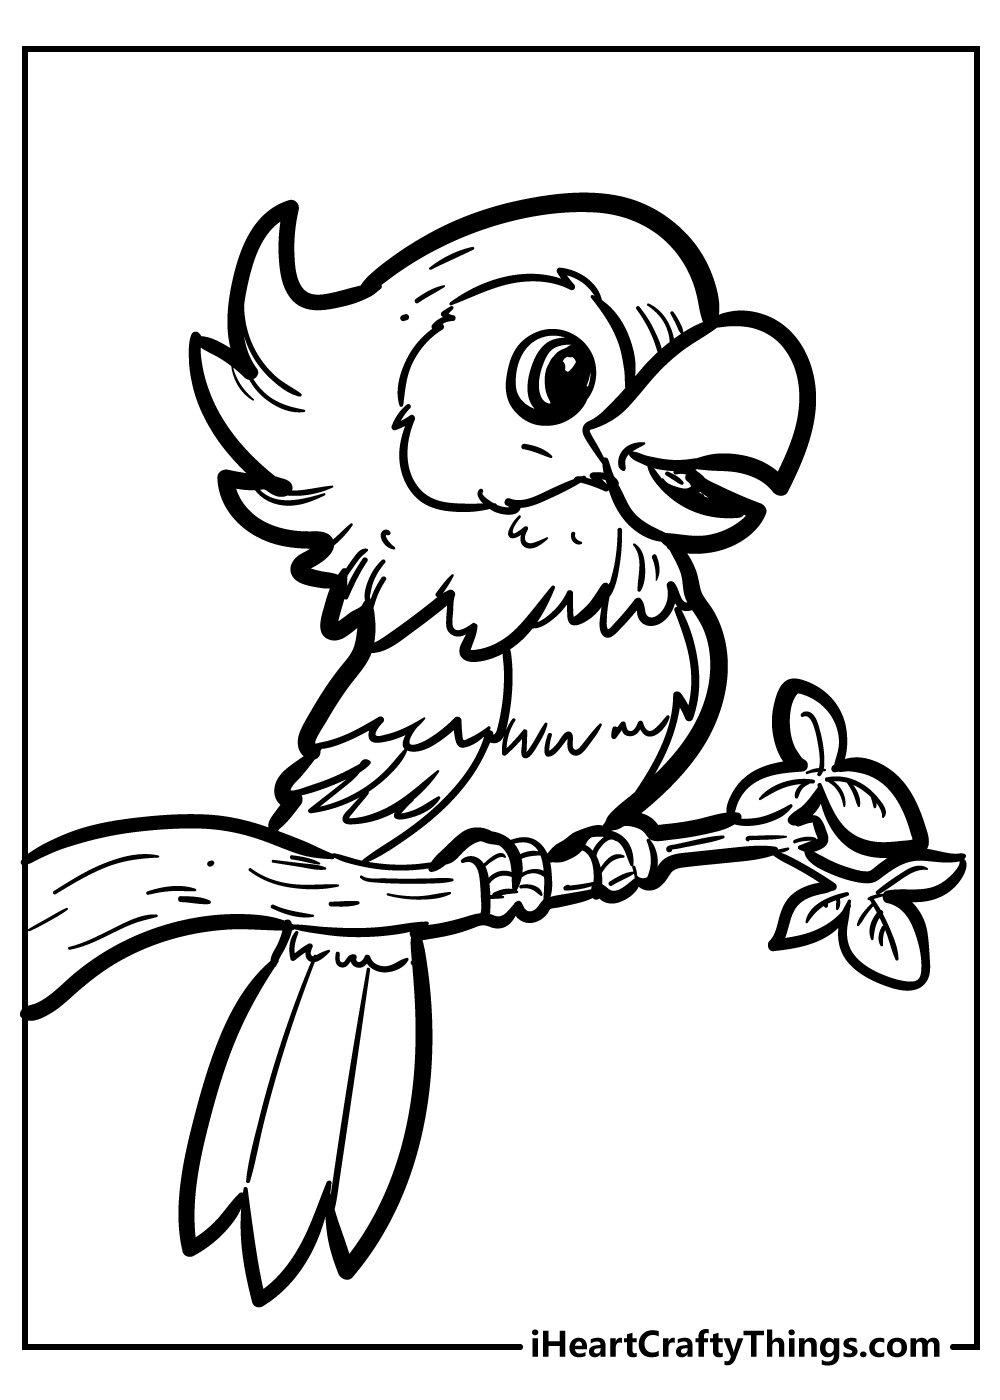 Bird coloring sheet for children free download